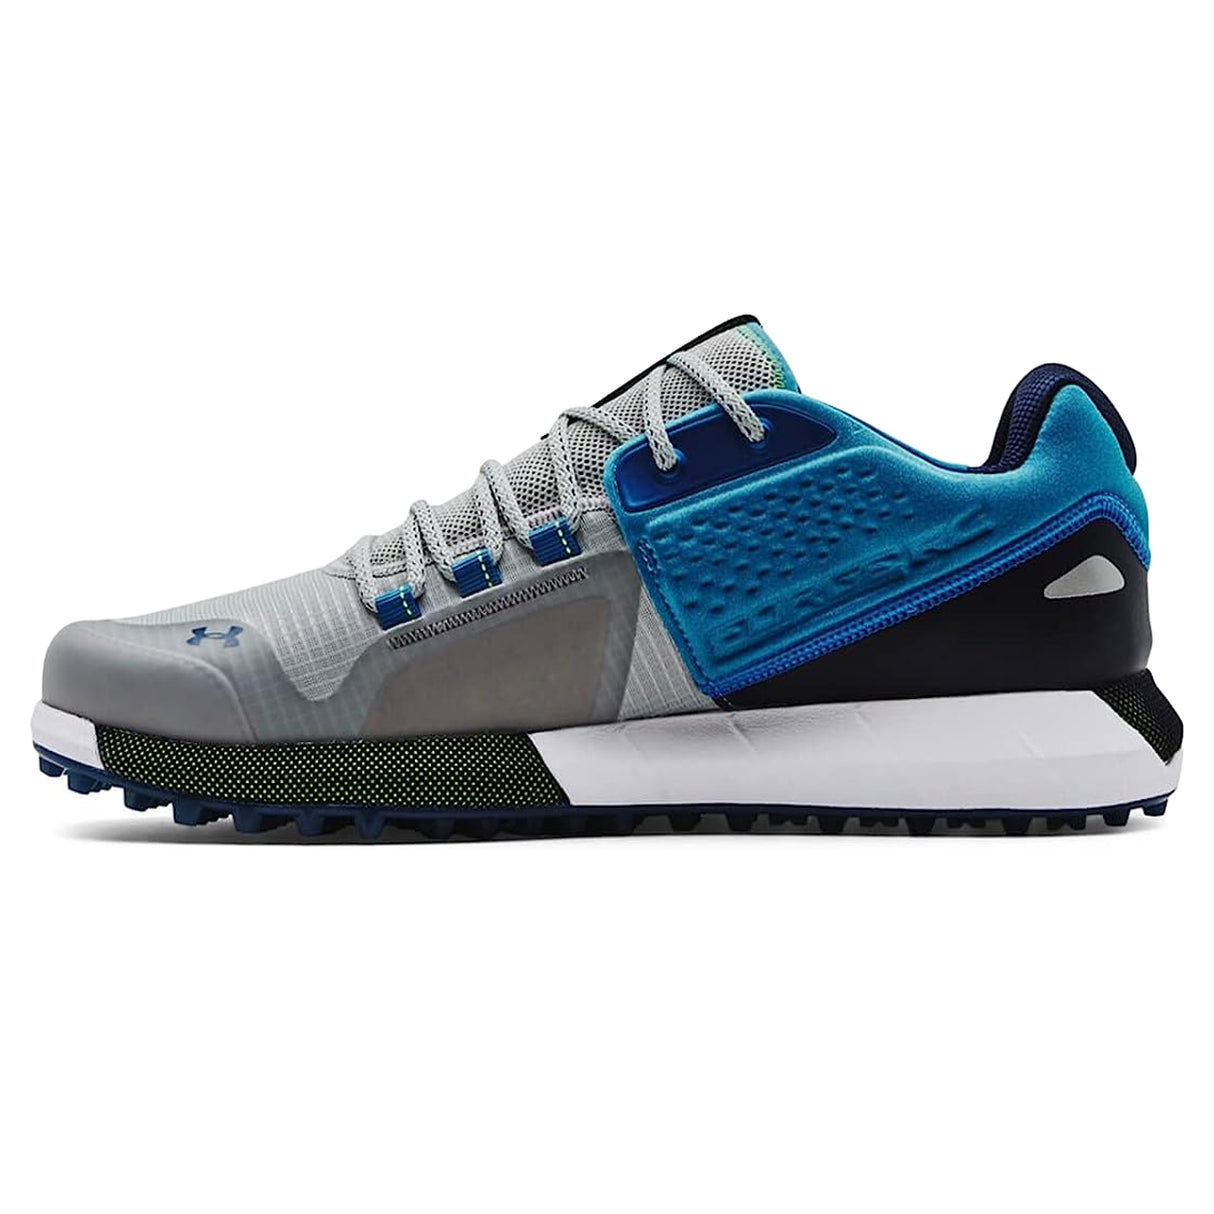 Under Armour Men's HOVR Forge RC Spikeless Golf Shoe